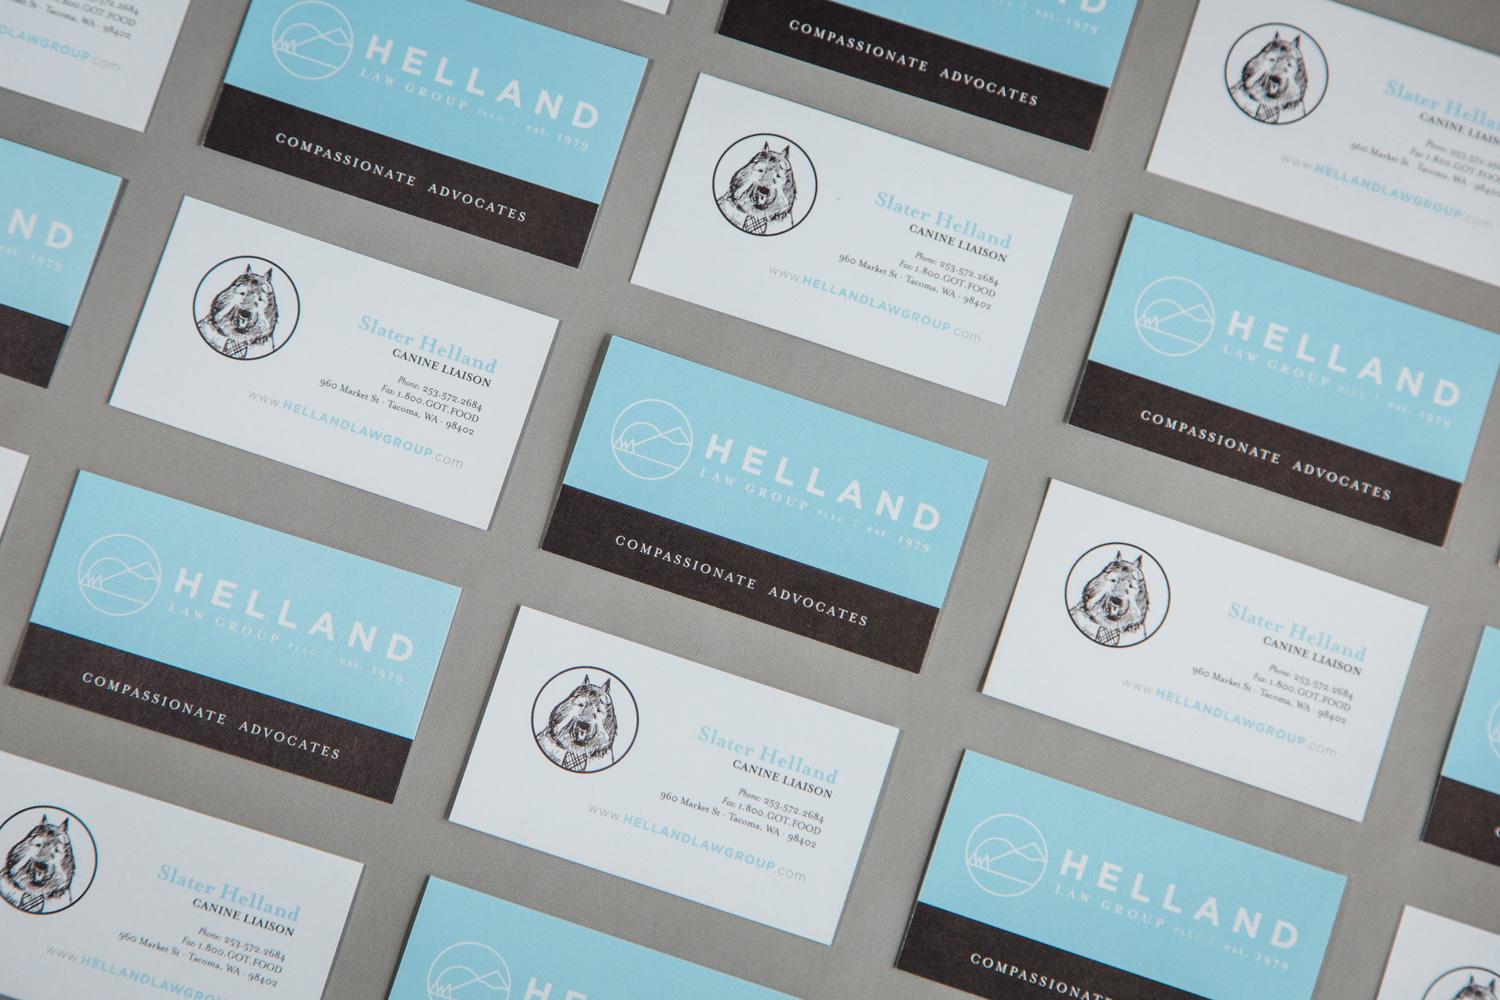 Helland Business cards